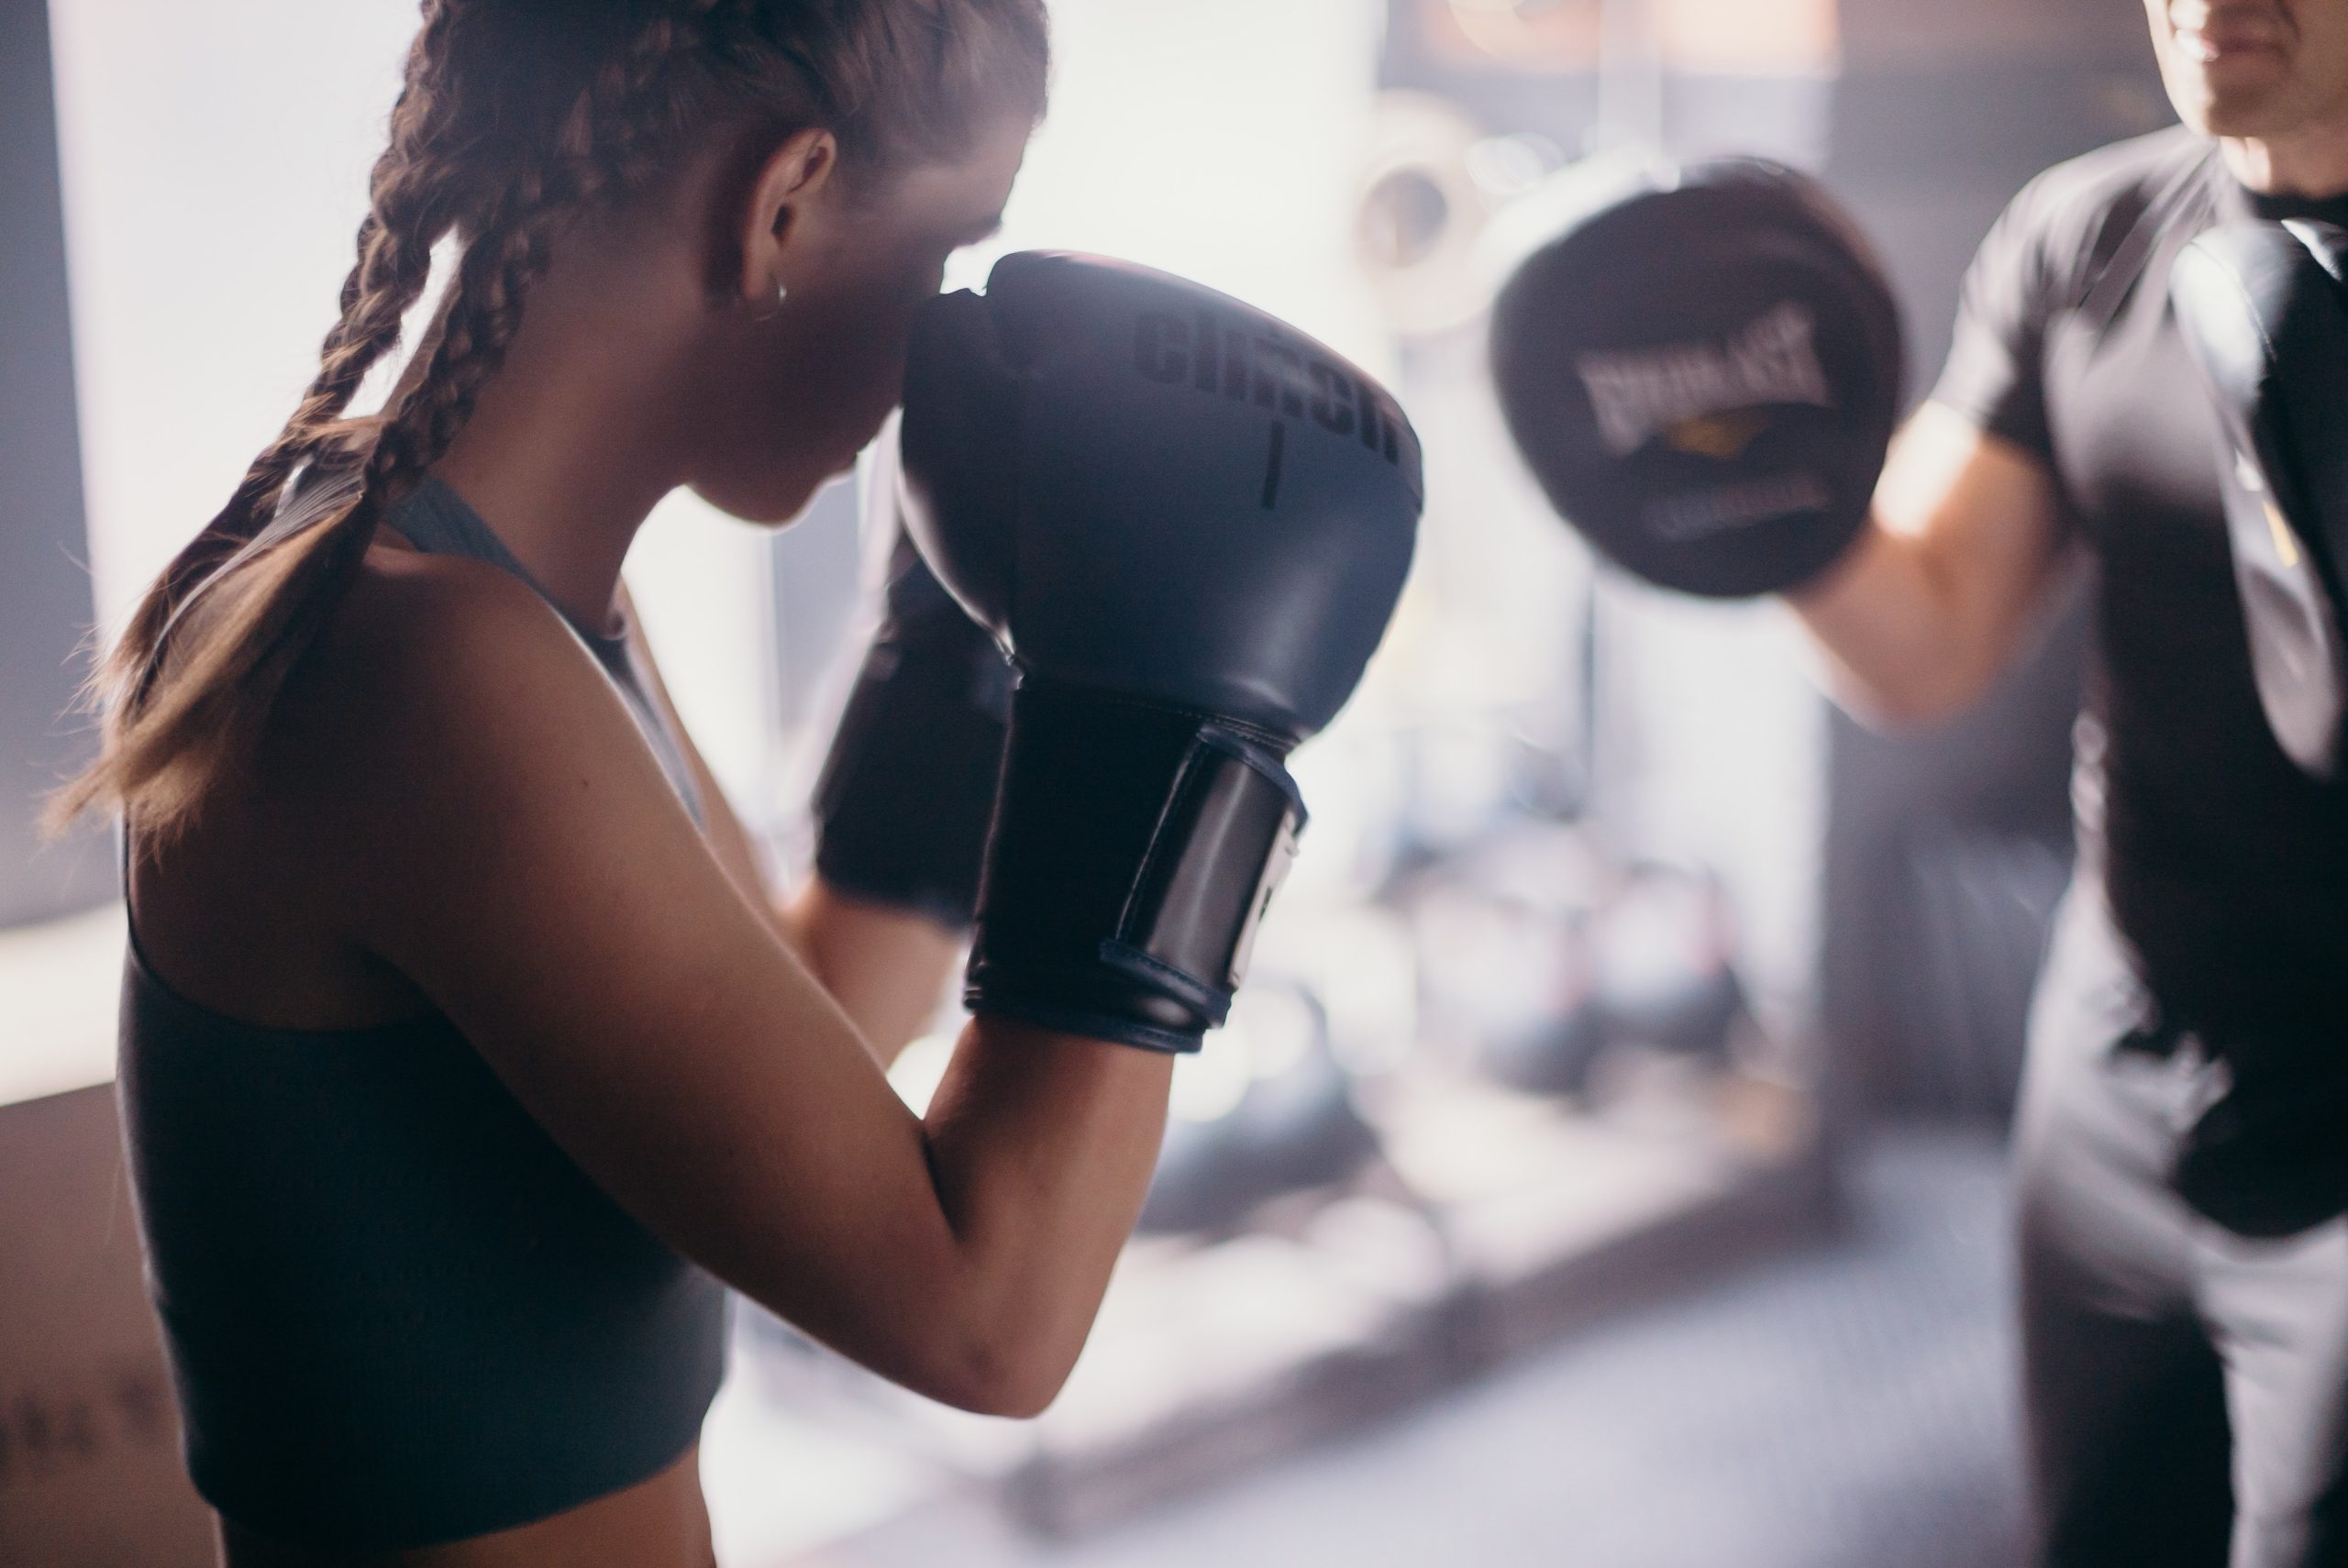 young woman sparring practice muay thai boxing gloves